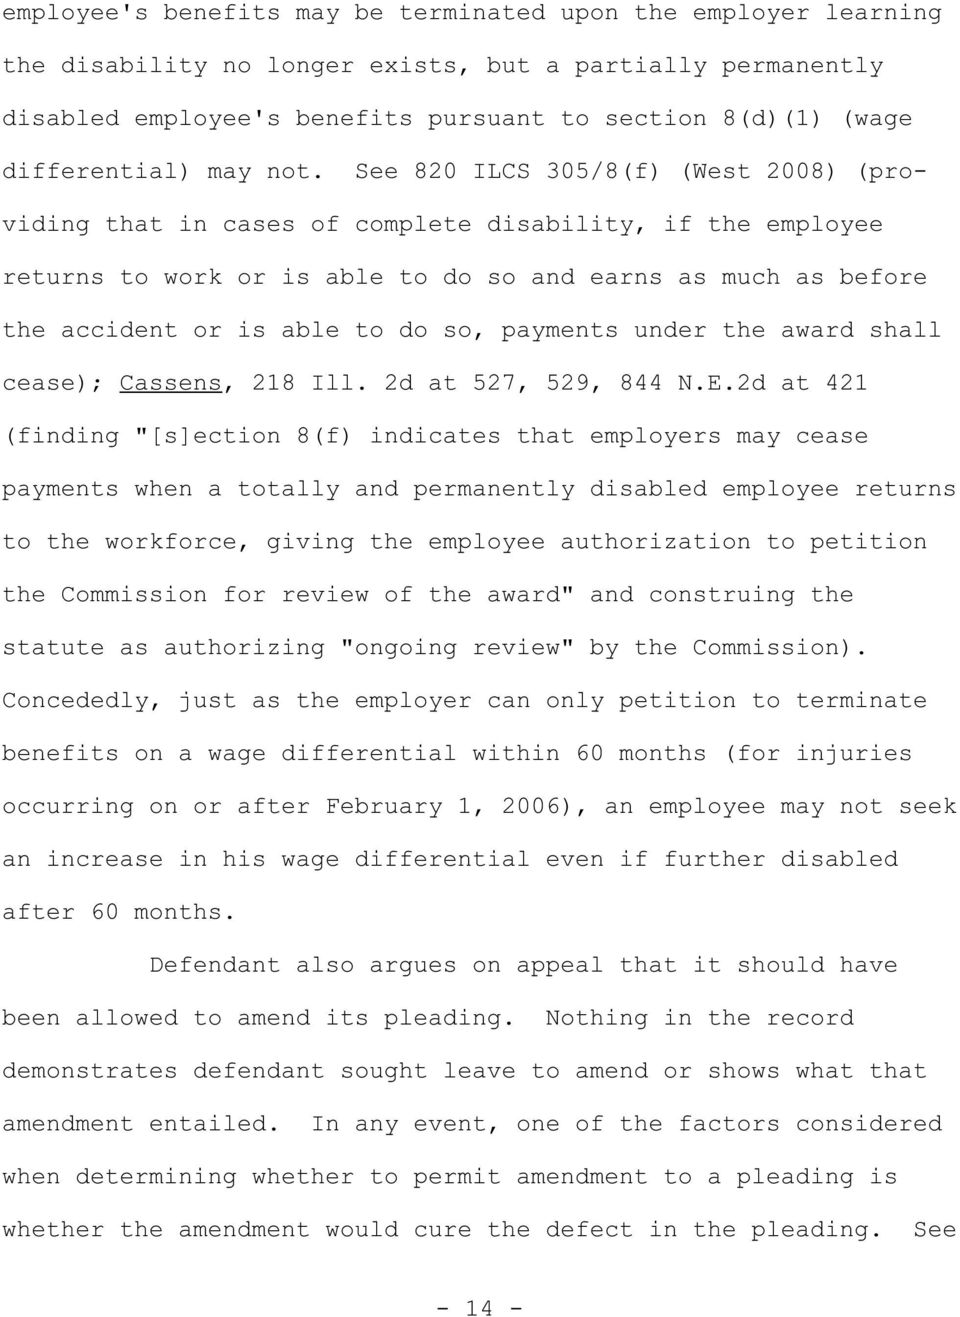 See 820 ILCS 305/8(f) (West 2008) (providing that in cases of complete disability, if the employee returns to work or is able to do so and earns as much as before the accident or is able to do so,